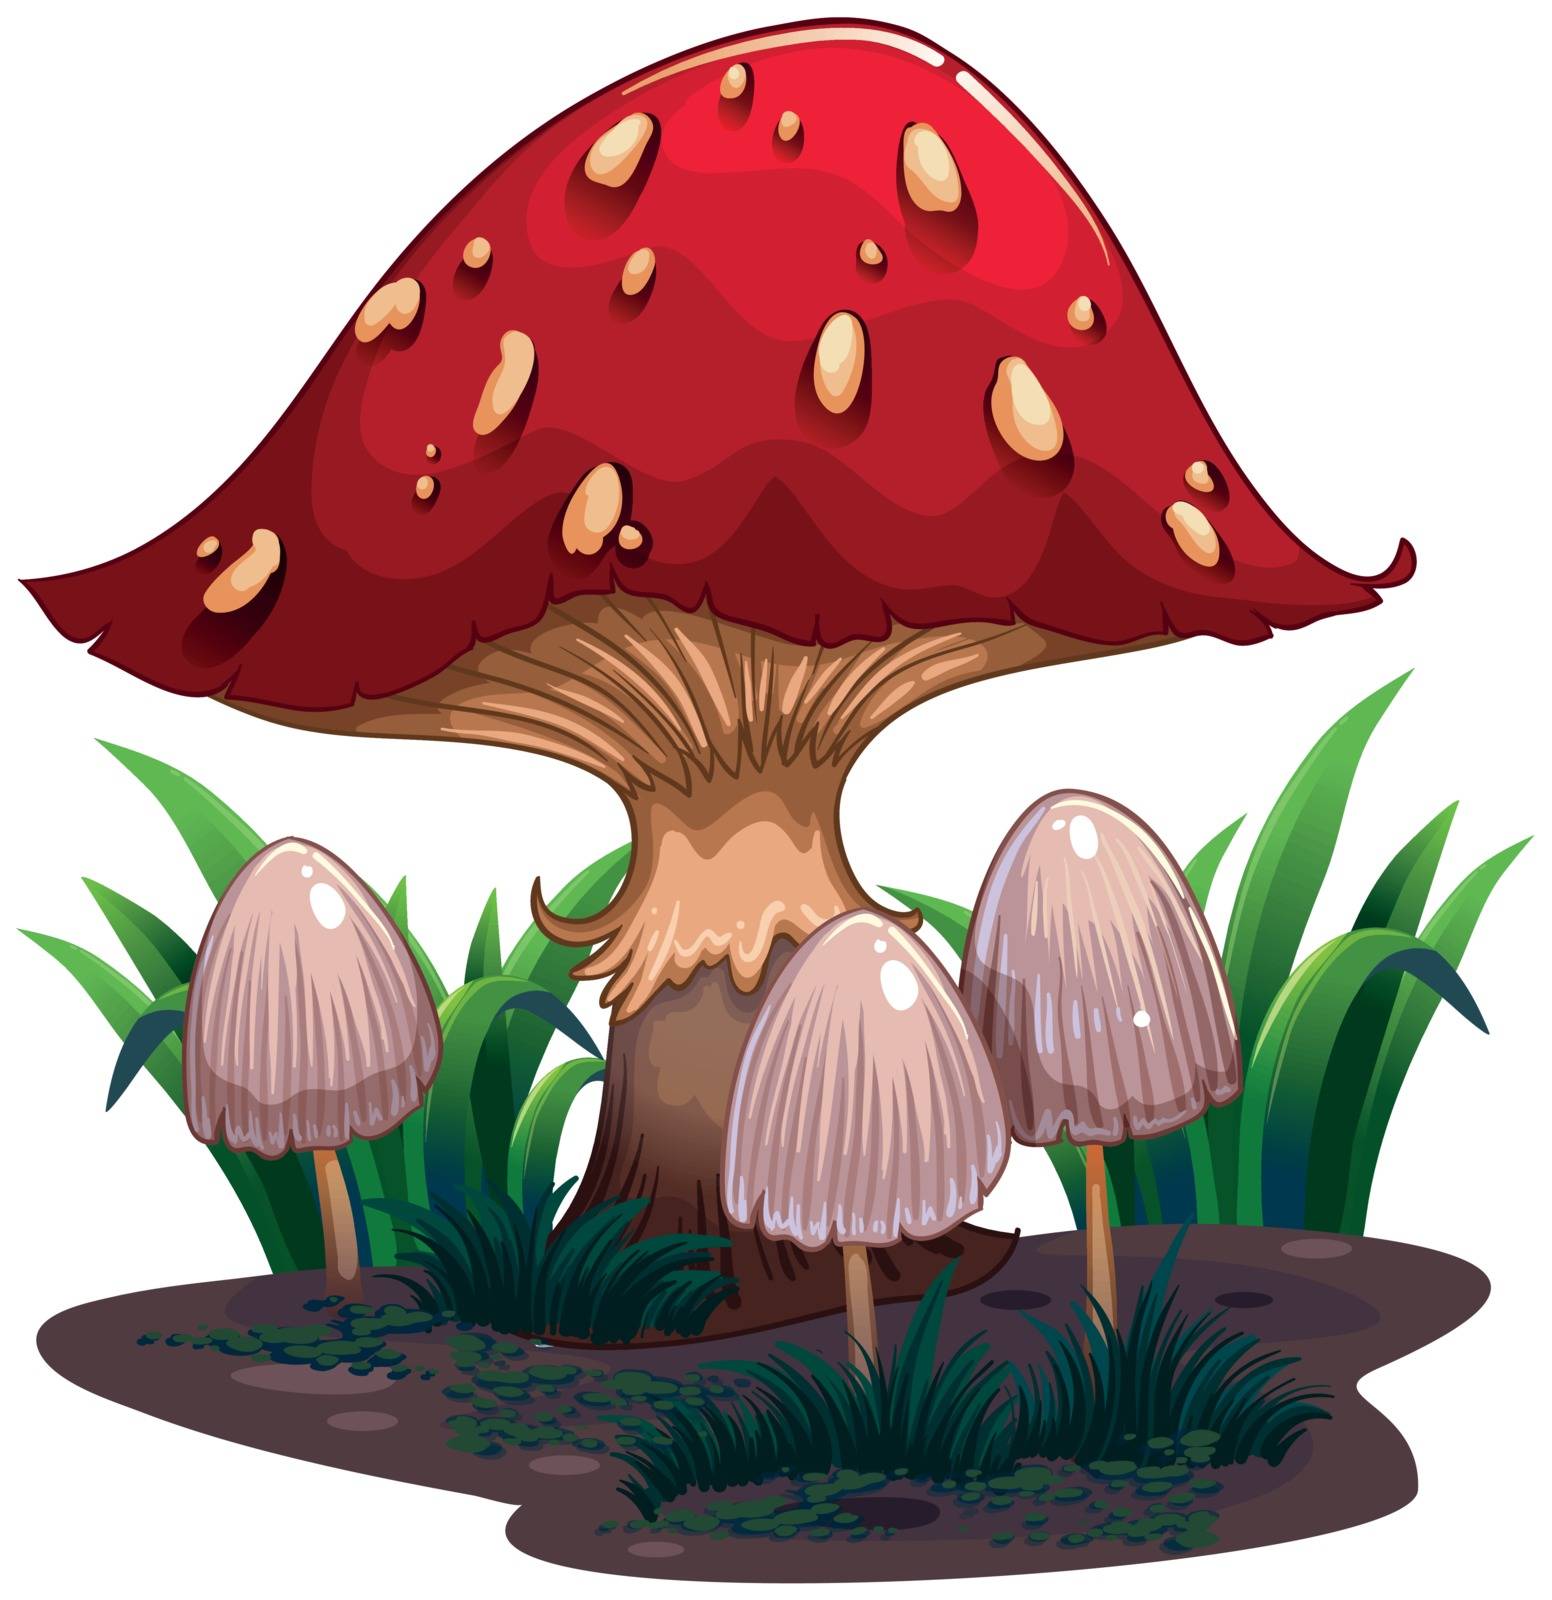 Illustration of an image of a huge mushroom on a white background